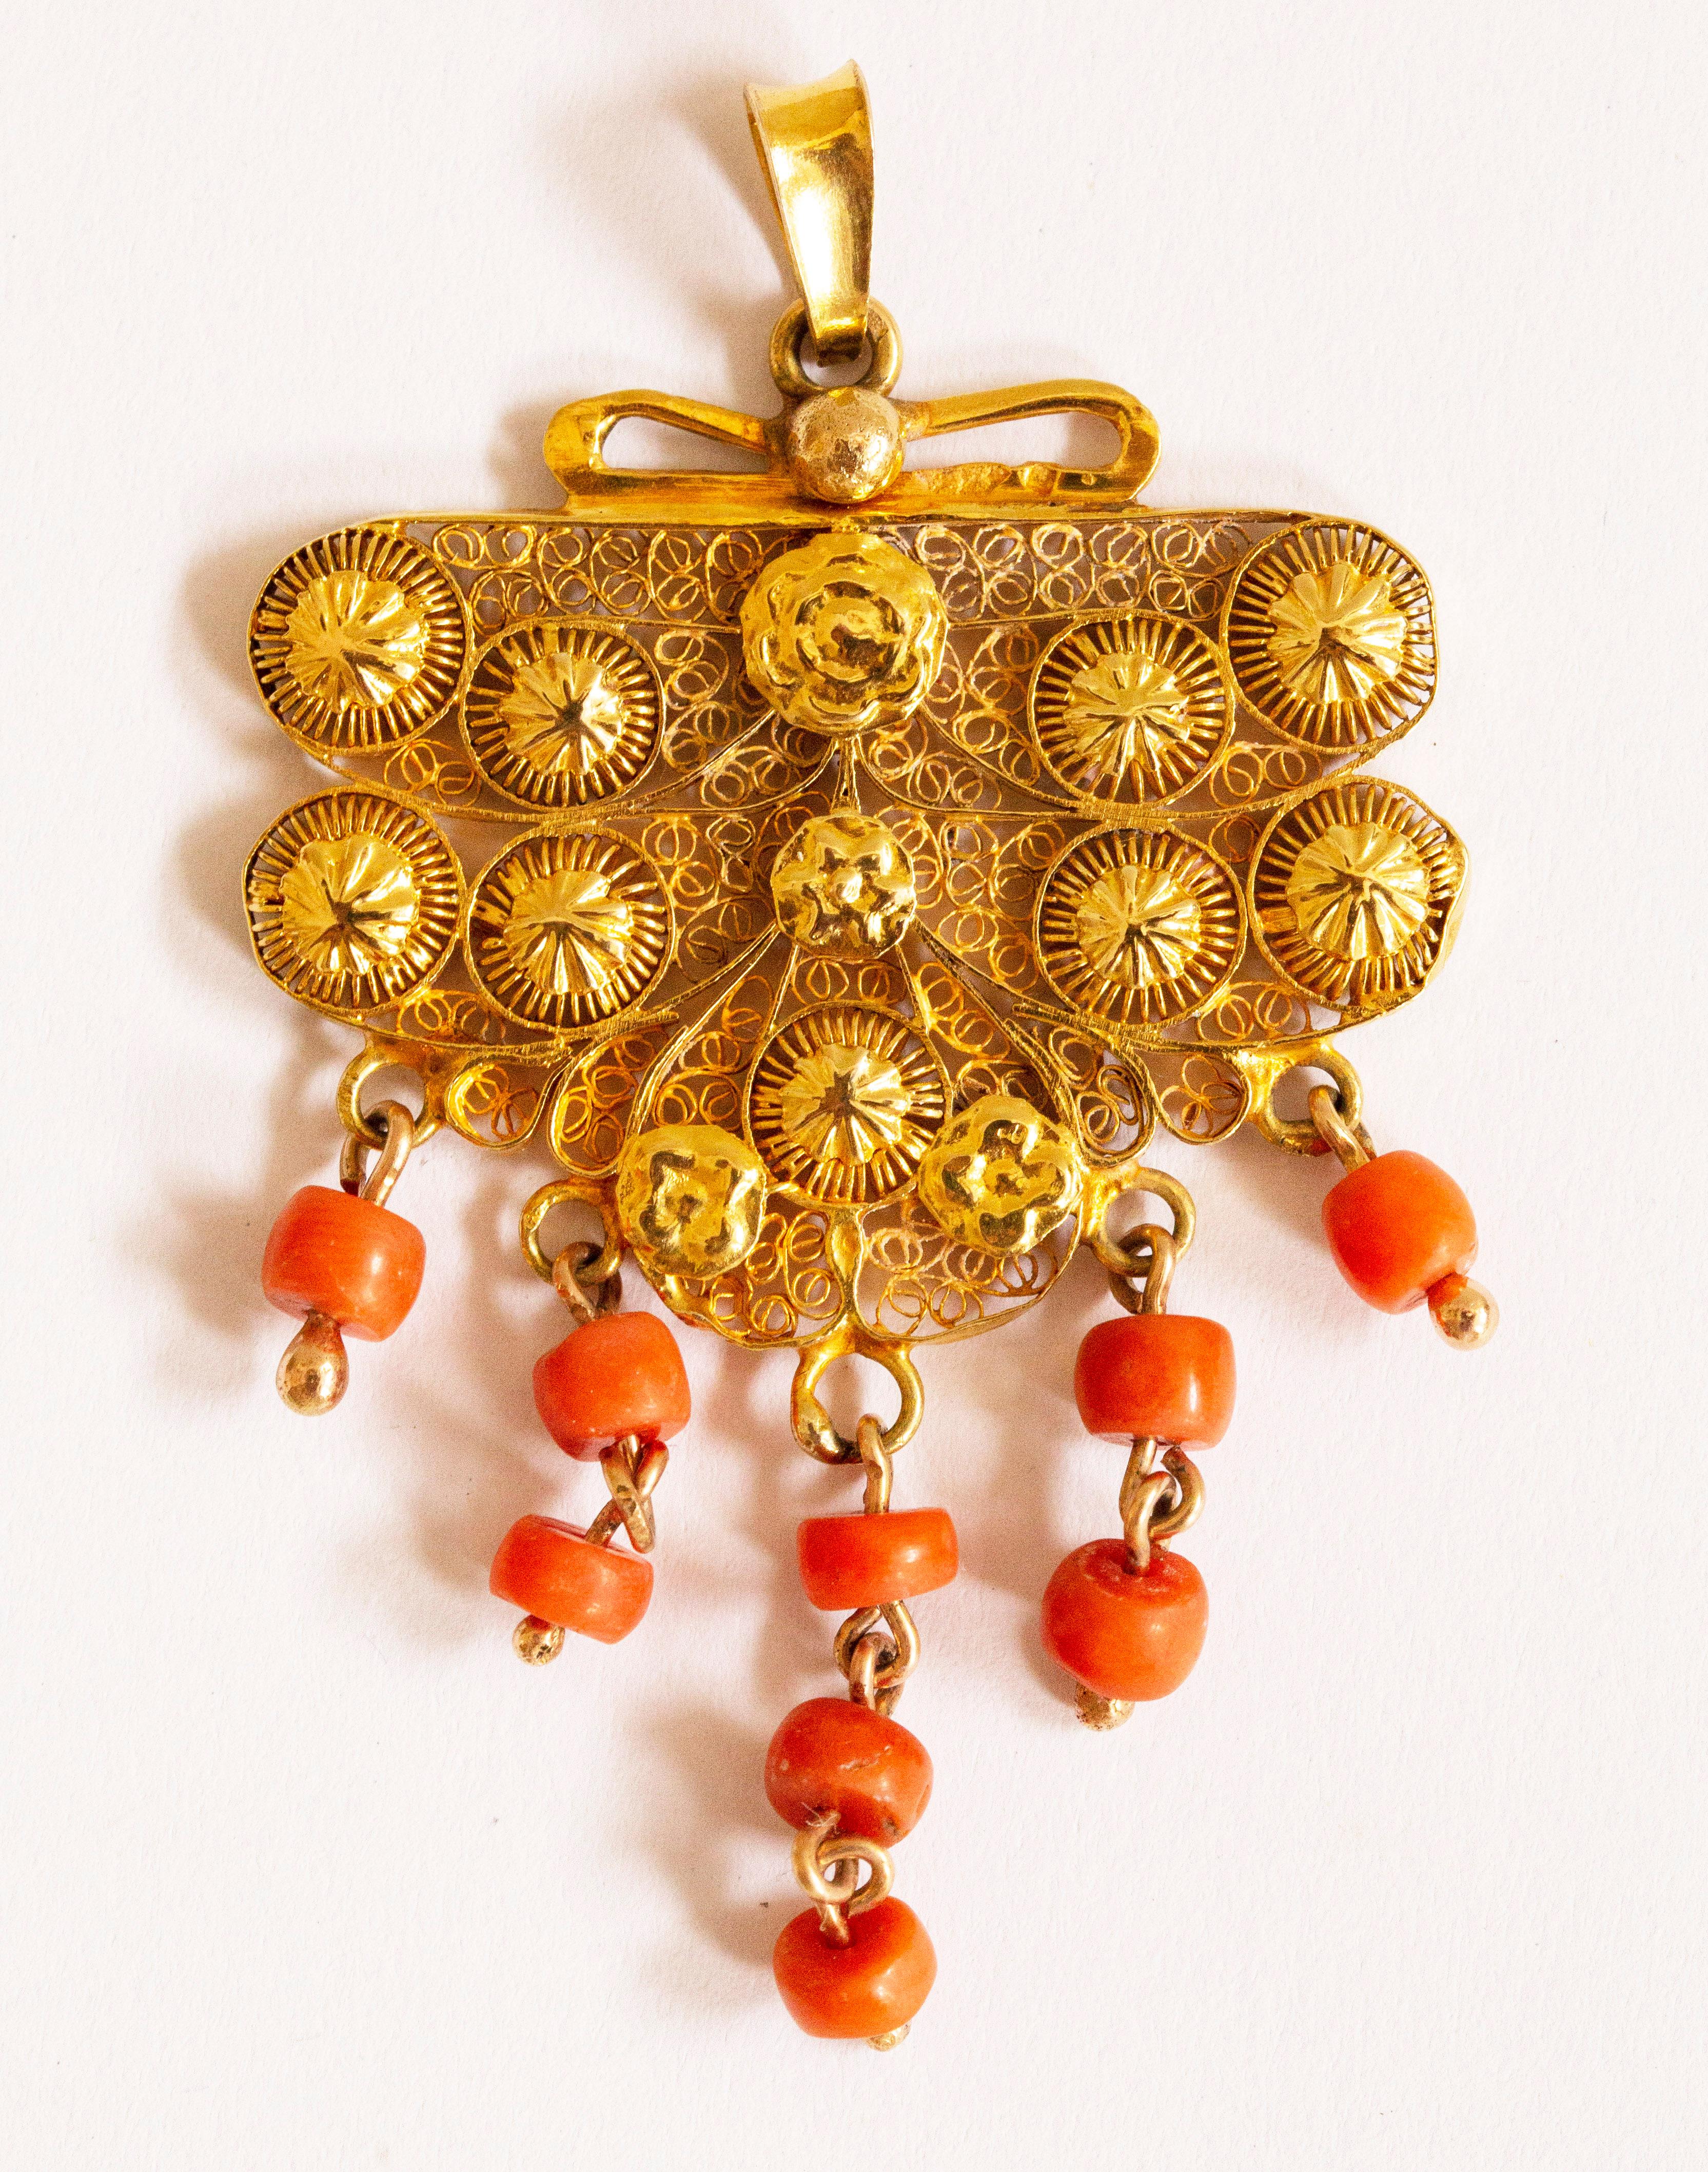 An antique Dutch 14 karat and red coral filigree pendant. The pendant is made from a lock of the traditional  Dutch costume worn around 1900 in a province called Zeeland. The pendant is made with filigree technique. Filigree is a very refined